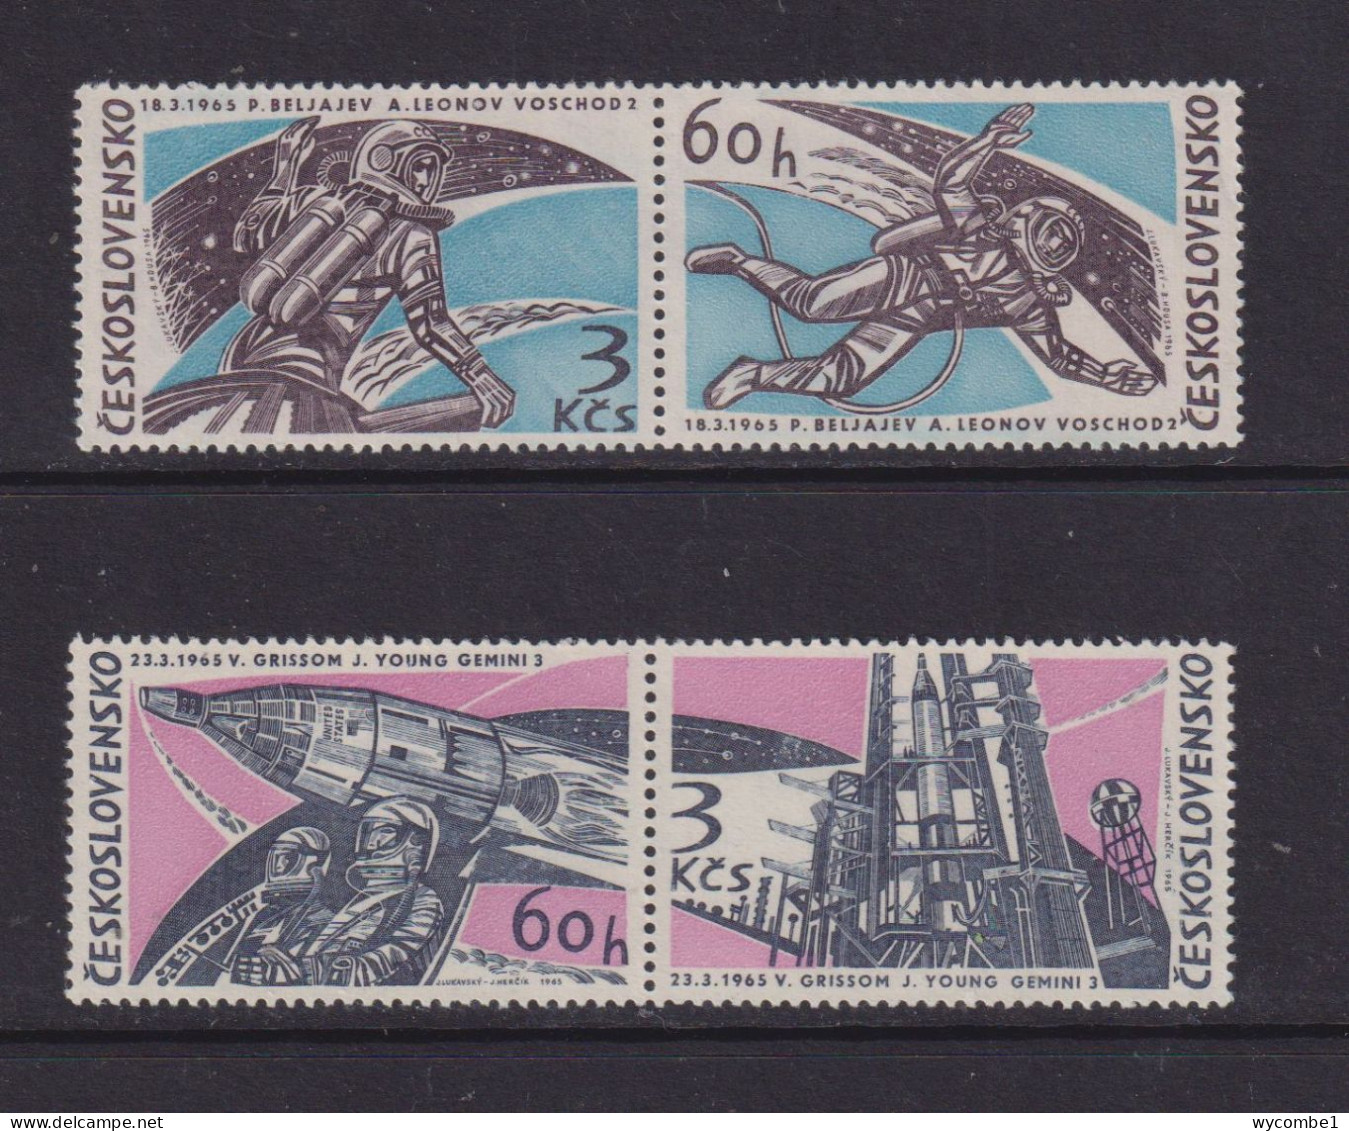 CZECHOSLOVAKIA  - 1965 Space Achievements Set Never Hinged Mint - Unused Stamps